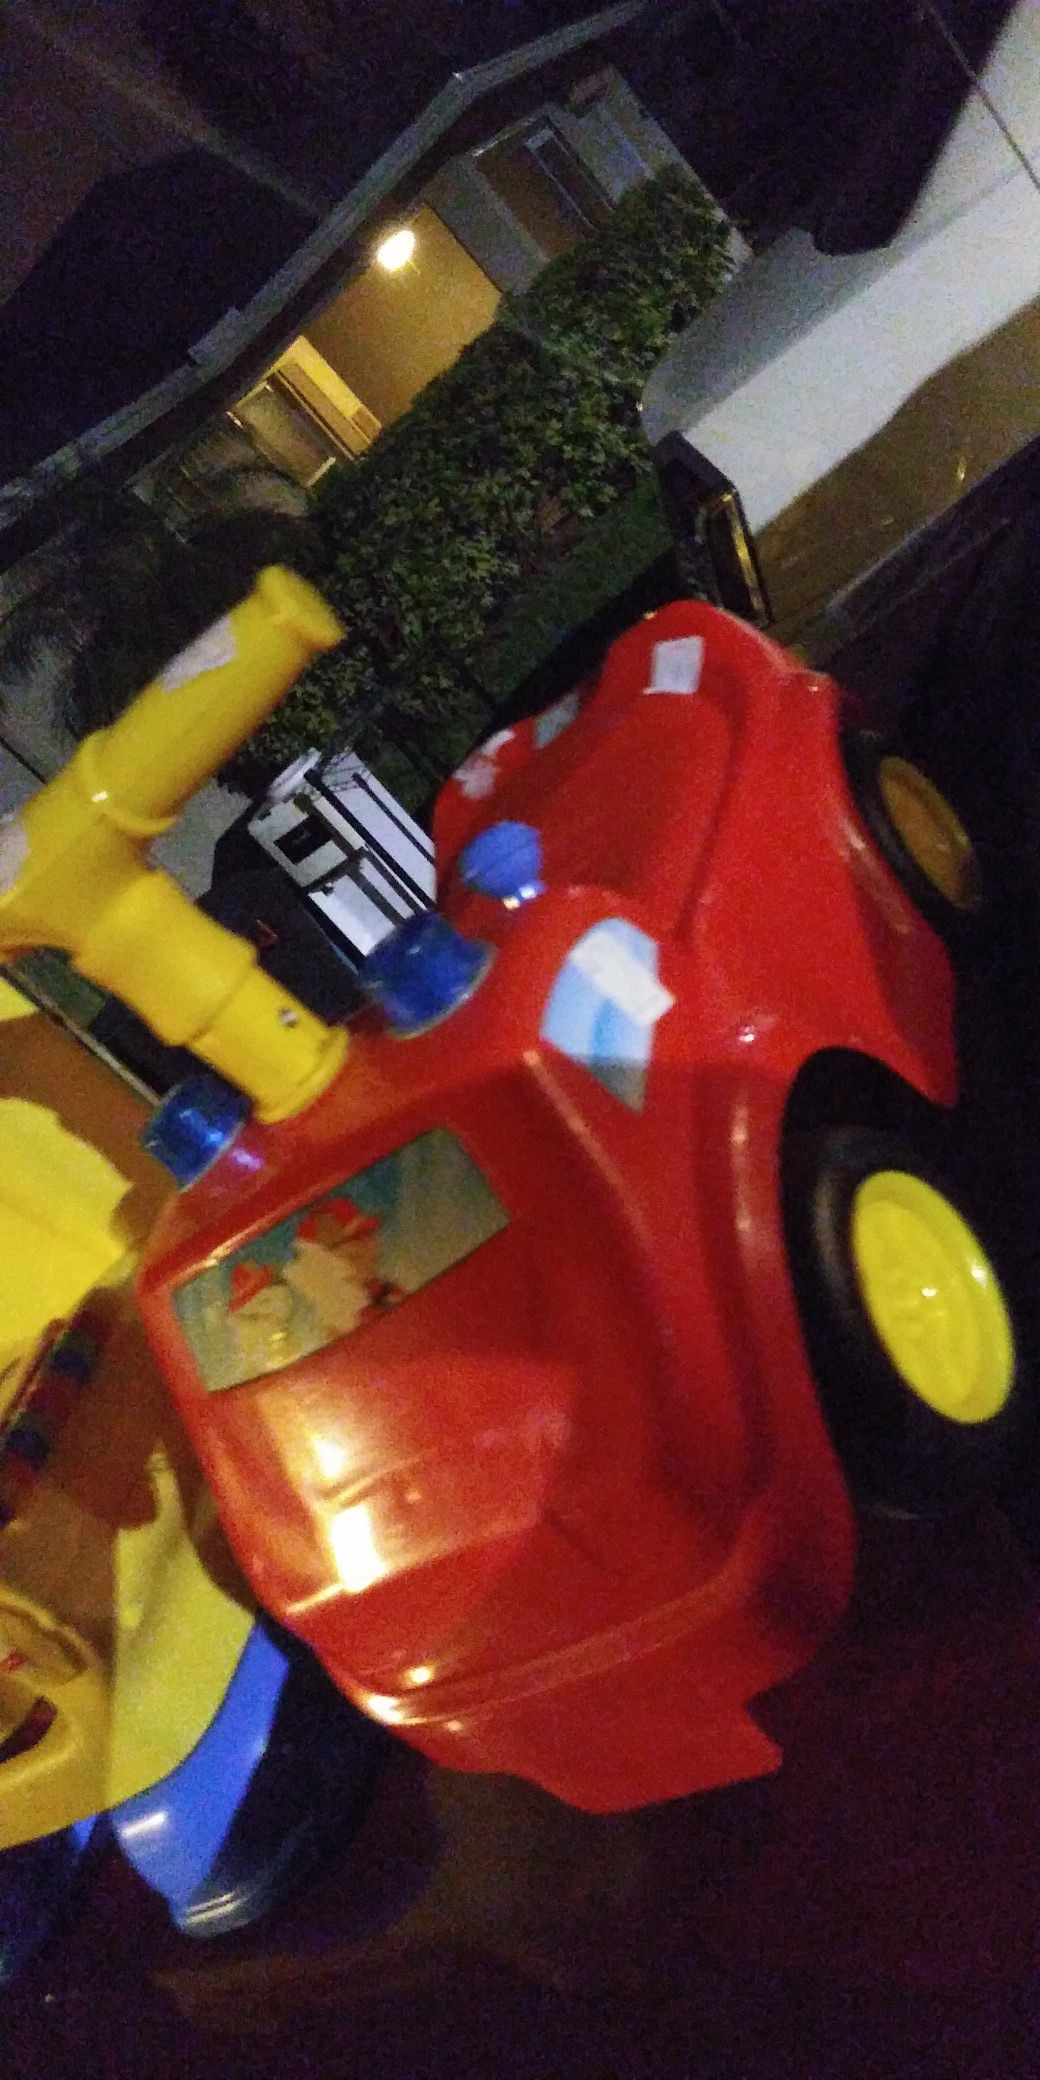 Kids ride toy beeps music lights etc 4dol Firm lots gd deals my post go look